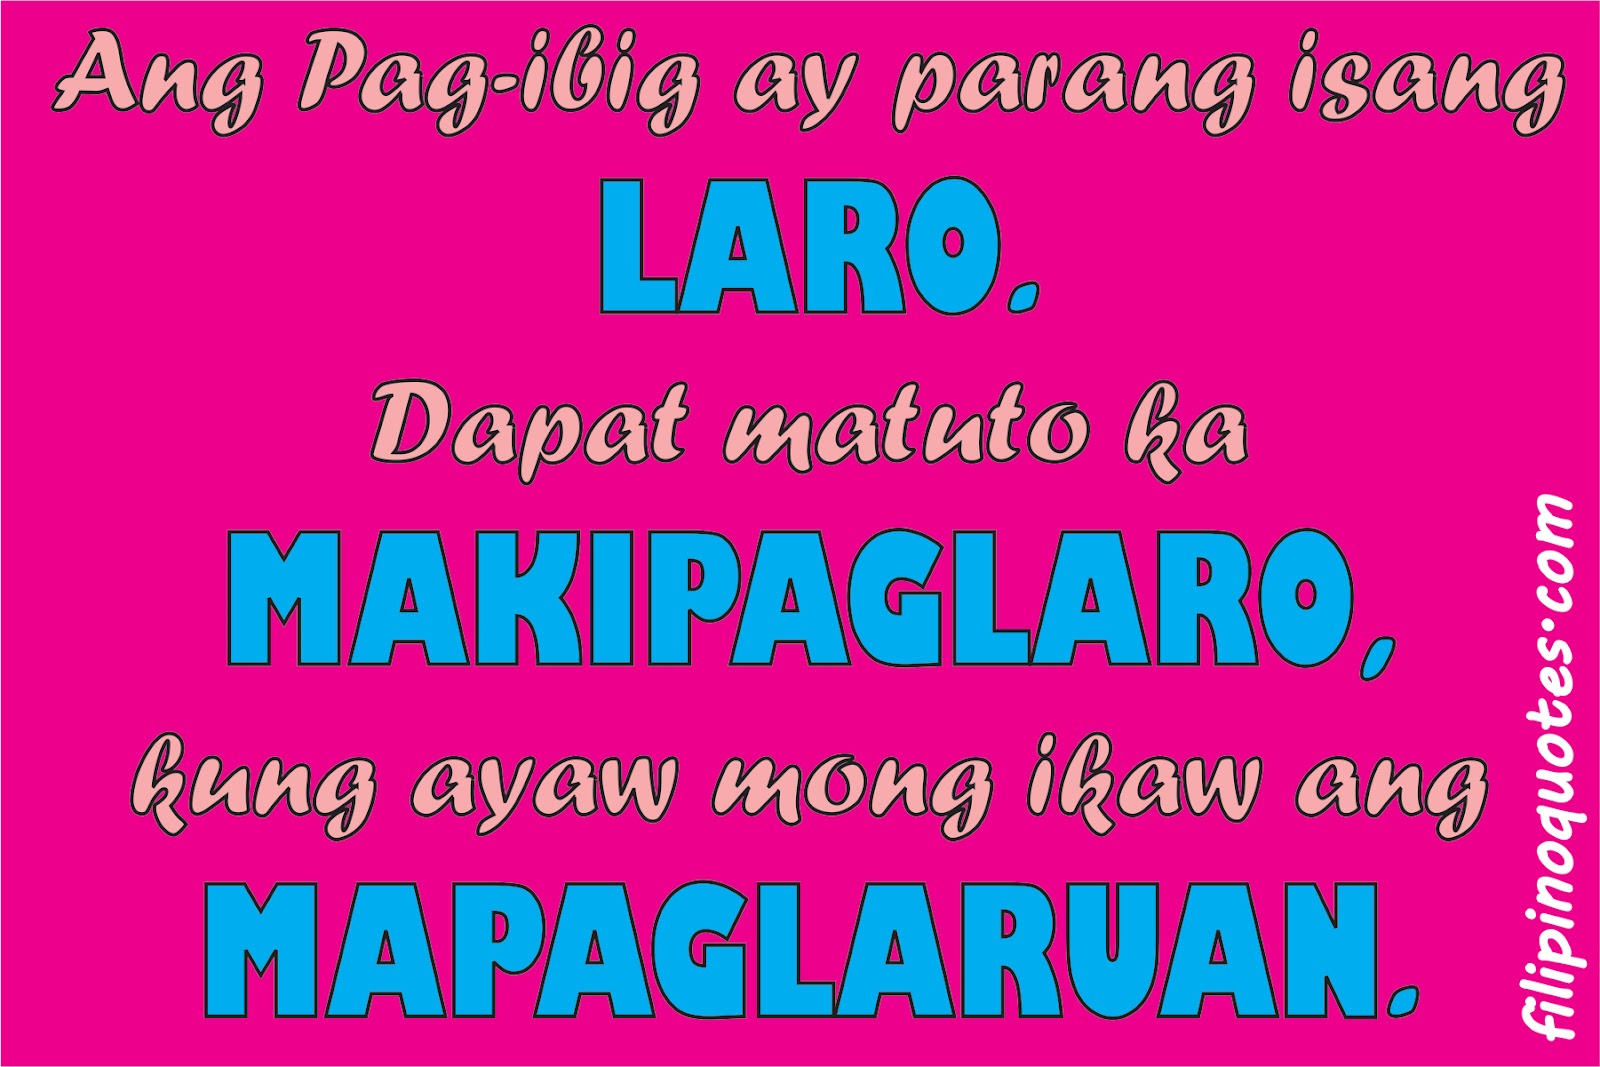 Motto In Life Tagalog Love - pic-voice